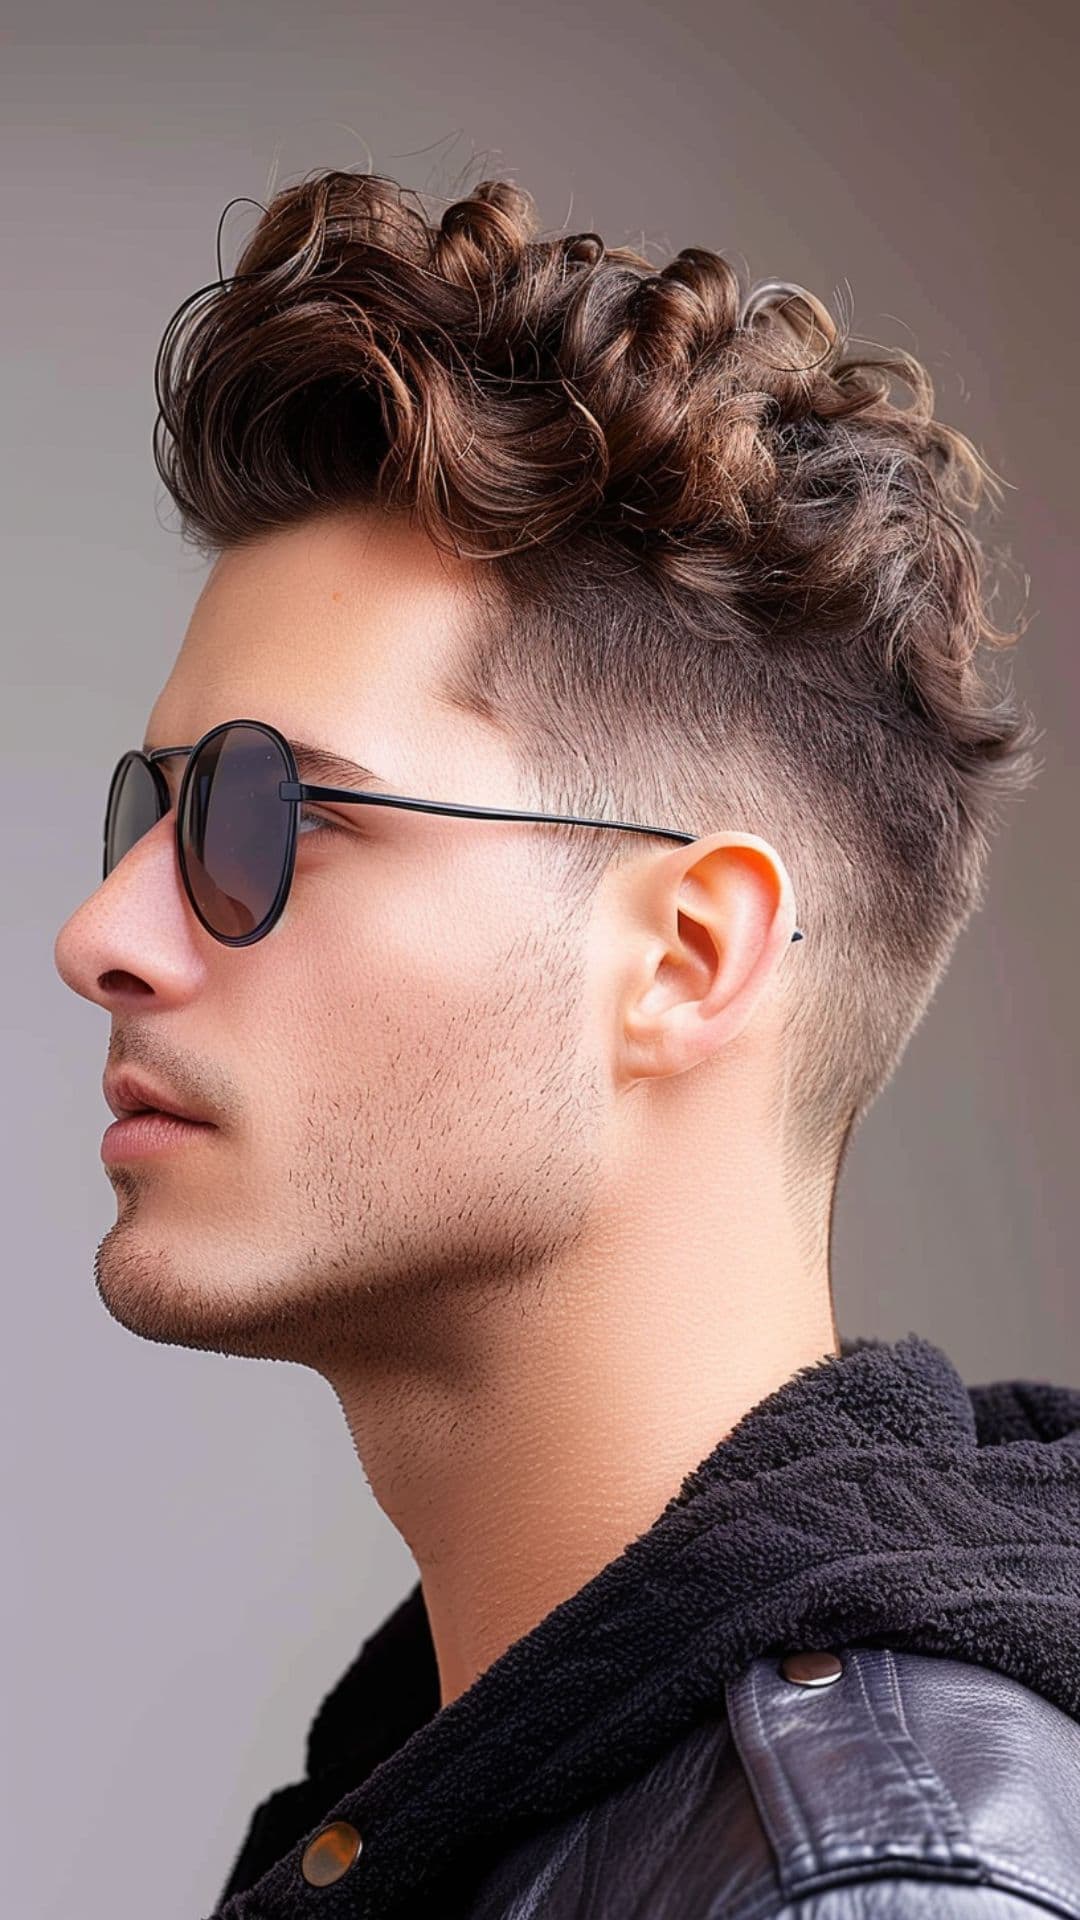 A man modelling a curly undercut hairstyle.